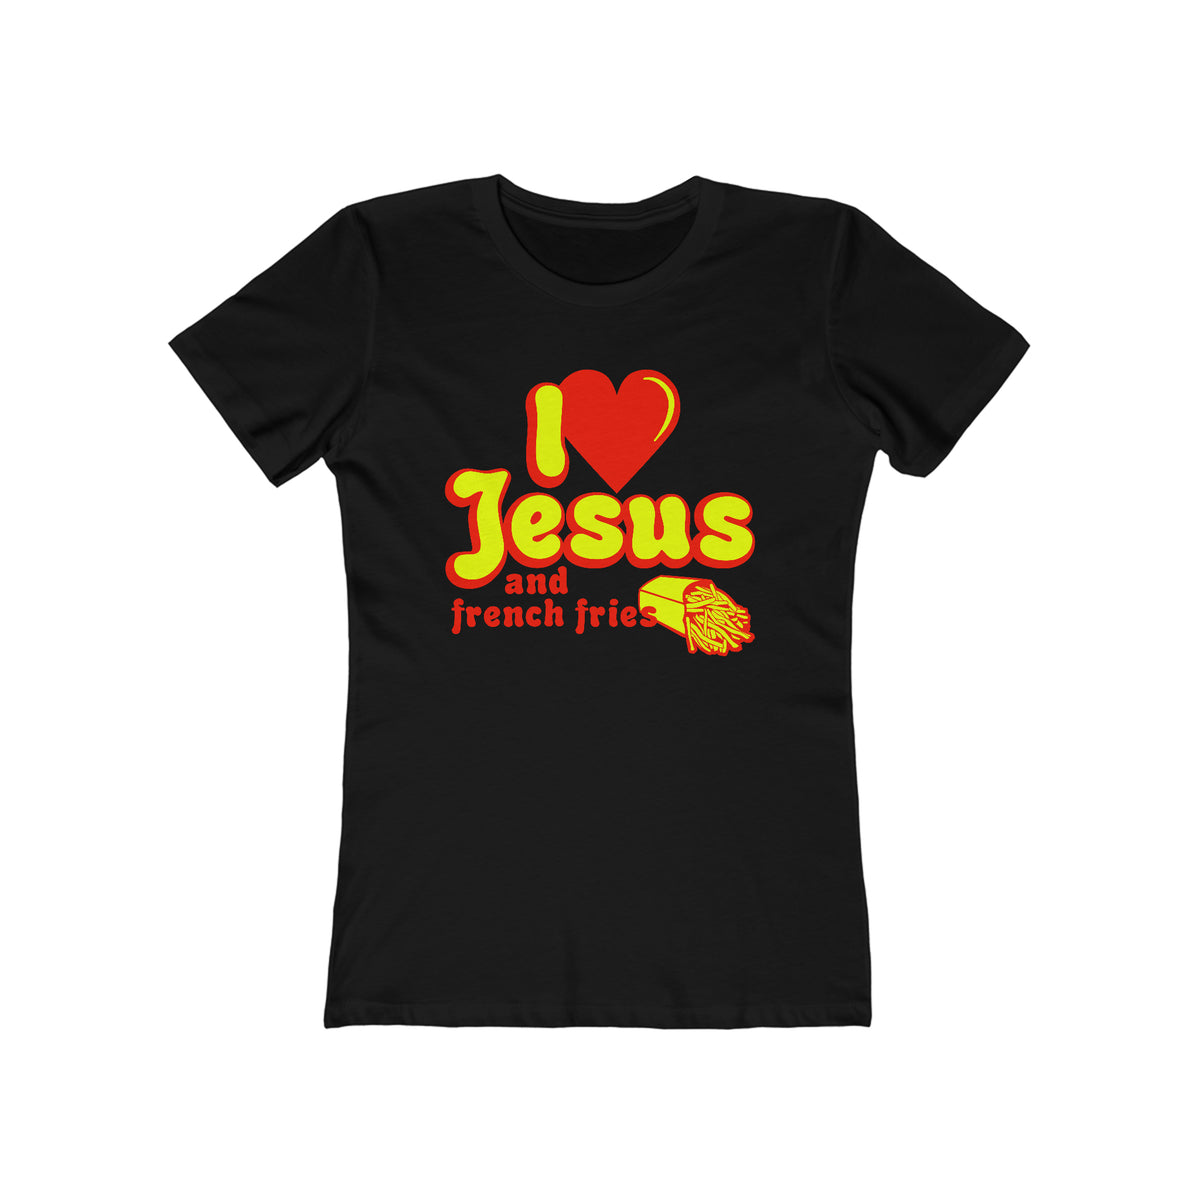 I Heart Jesus (And French Fries)  - Women’s T-Shirt